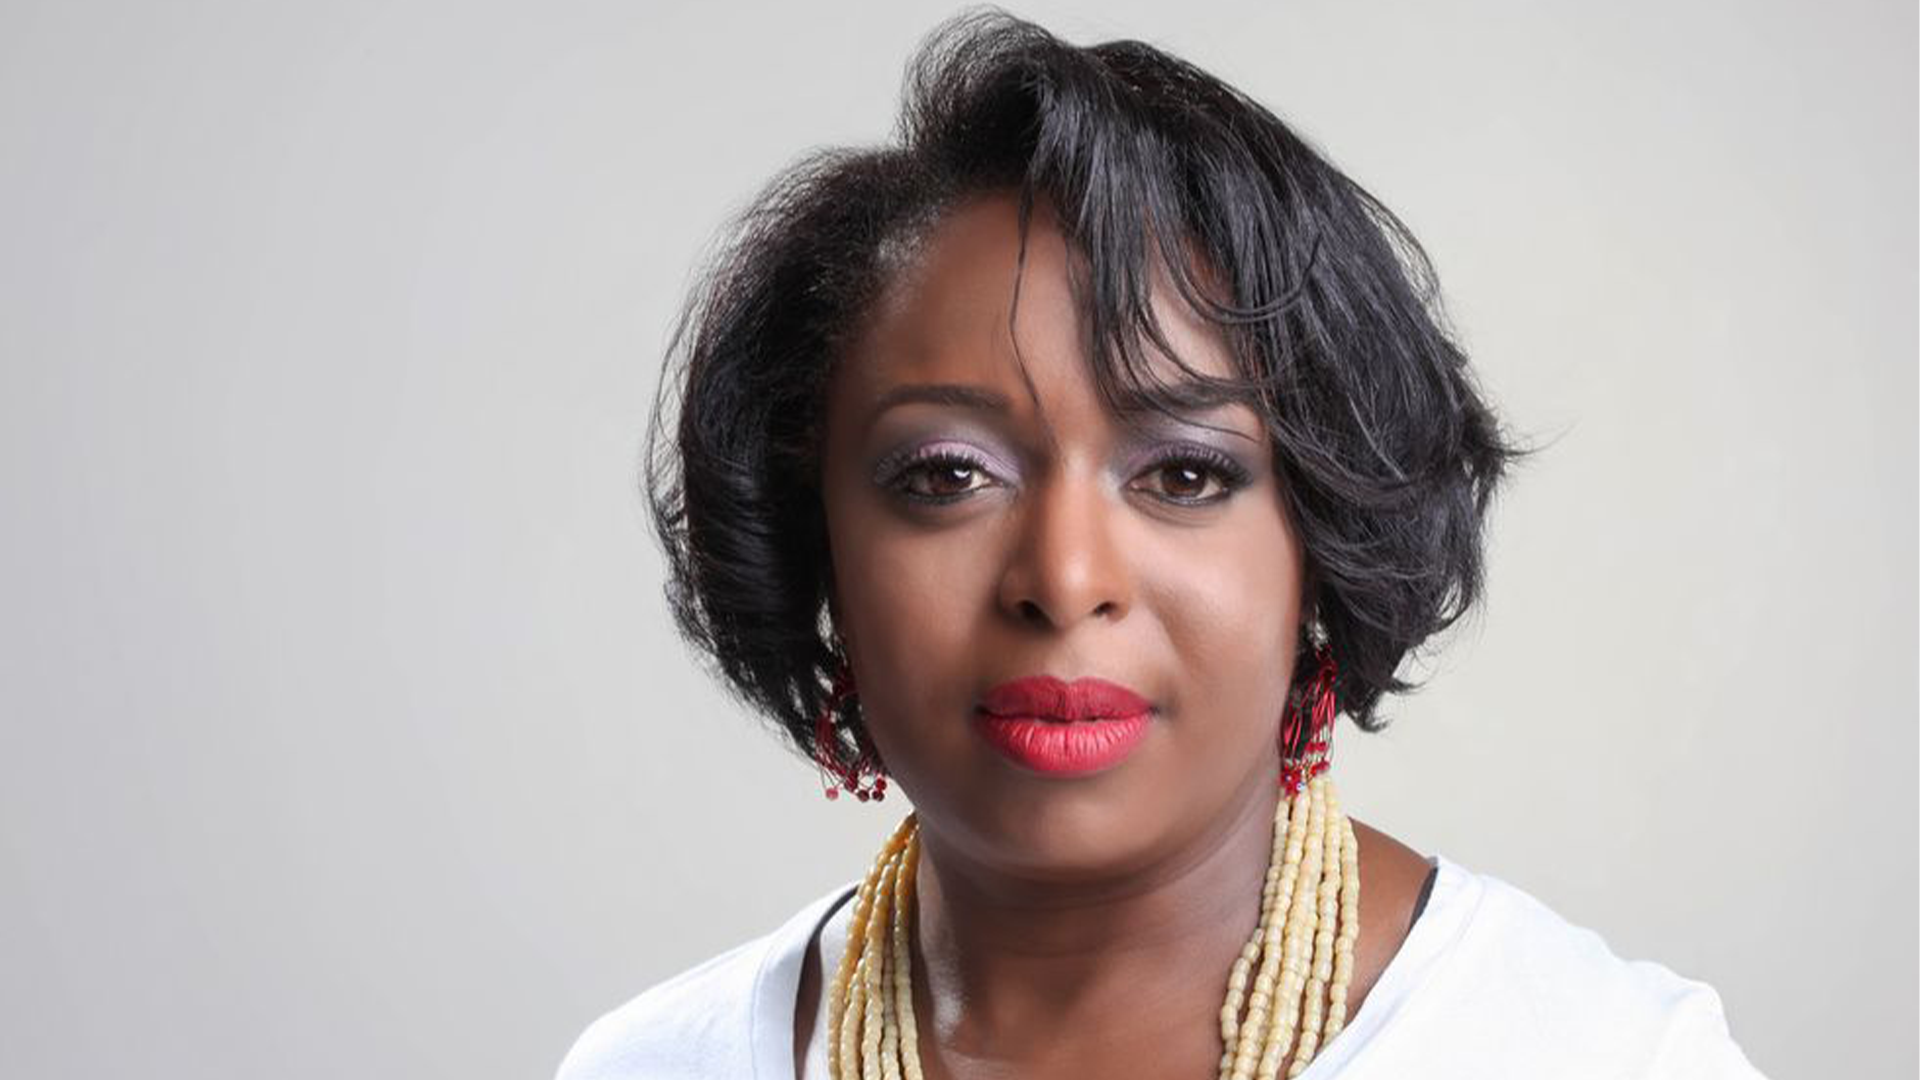 Exclusive: Black Girls Code Founder Kimberly Bryant Shares Her Side Of The Story After Being Removed As The CEO